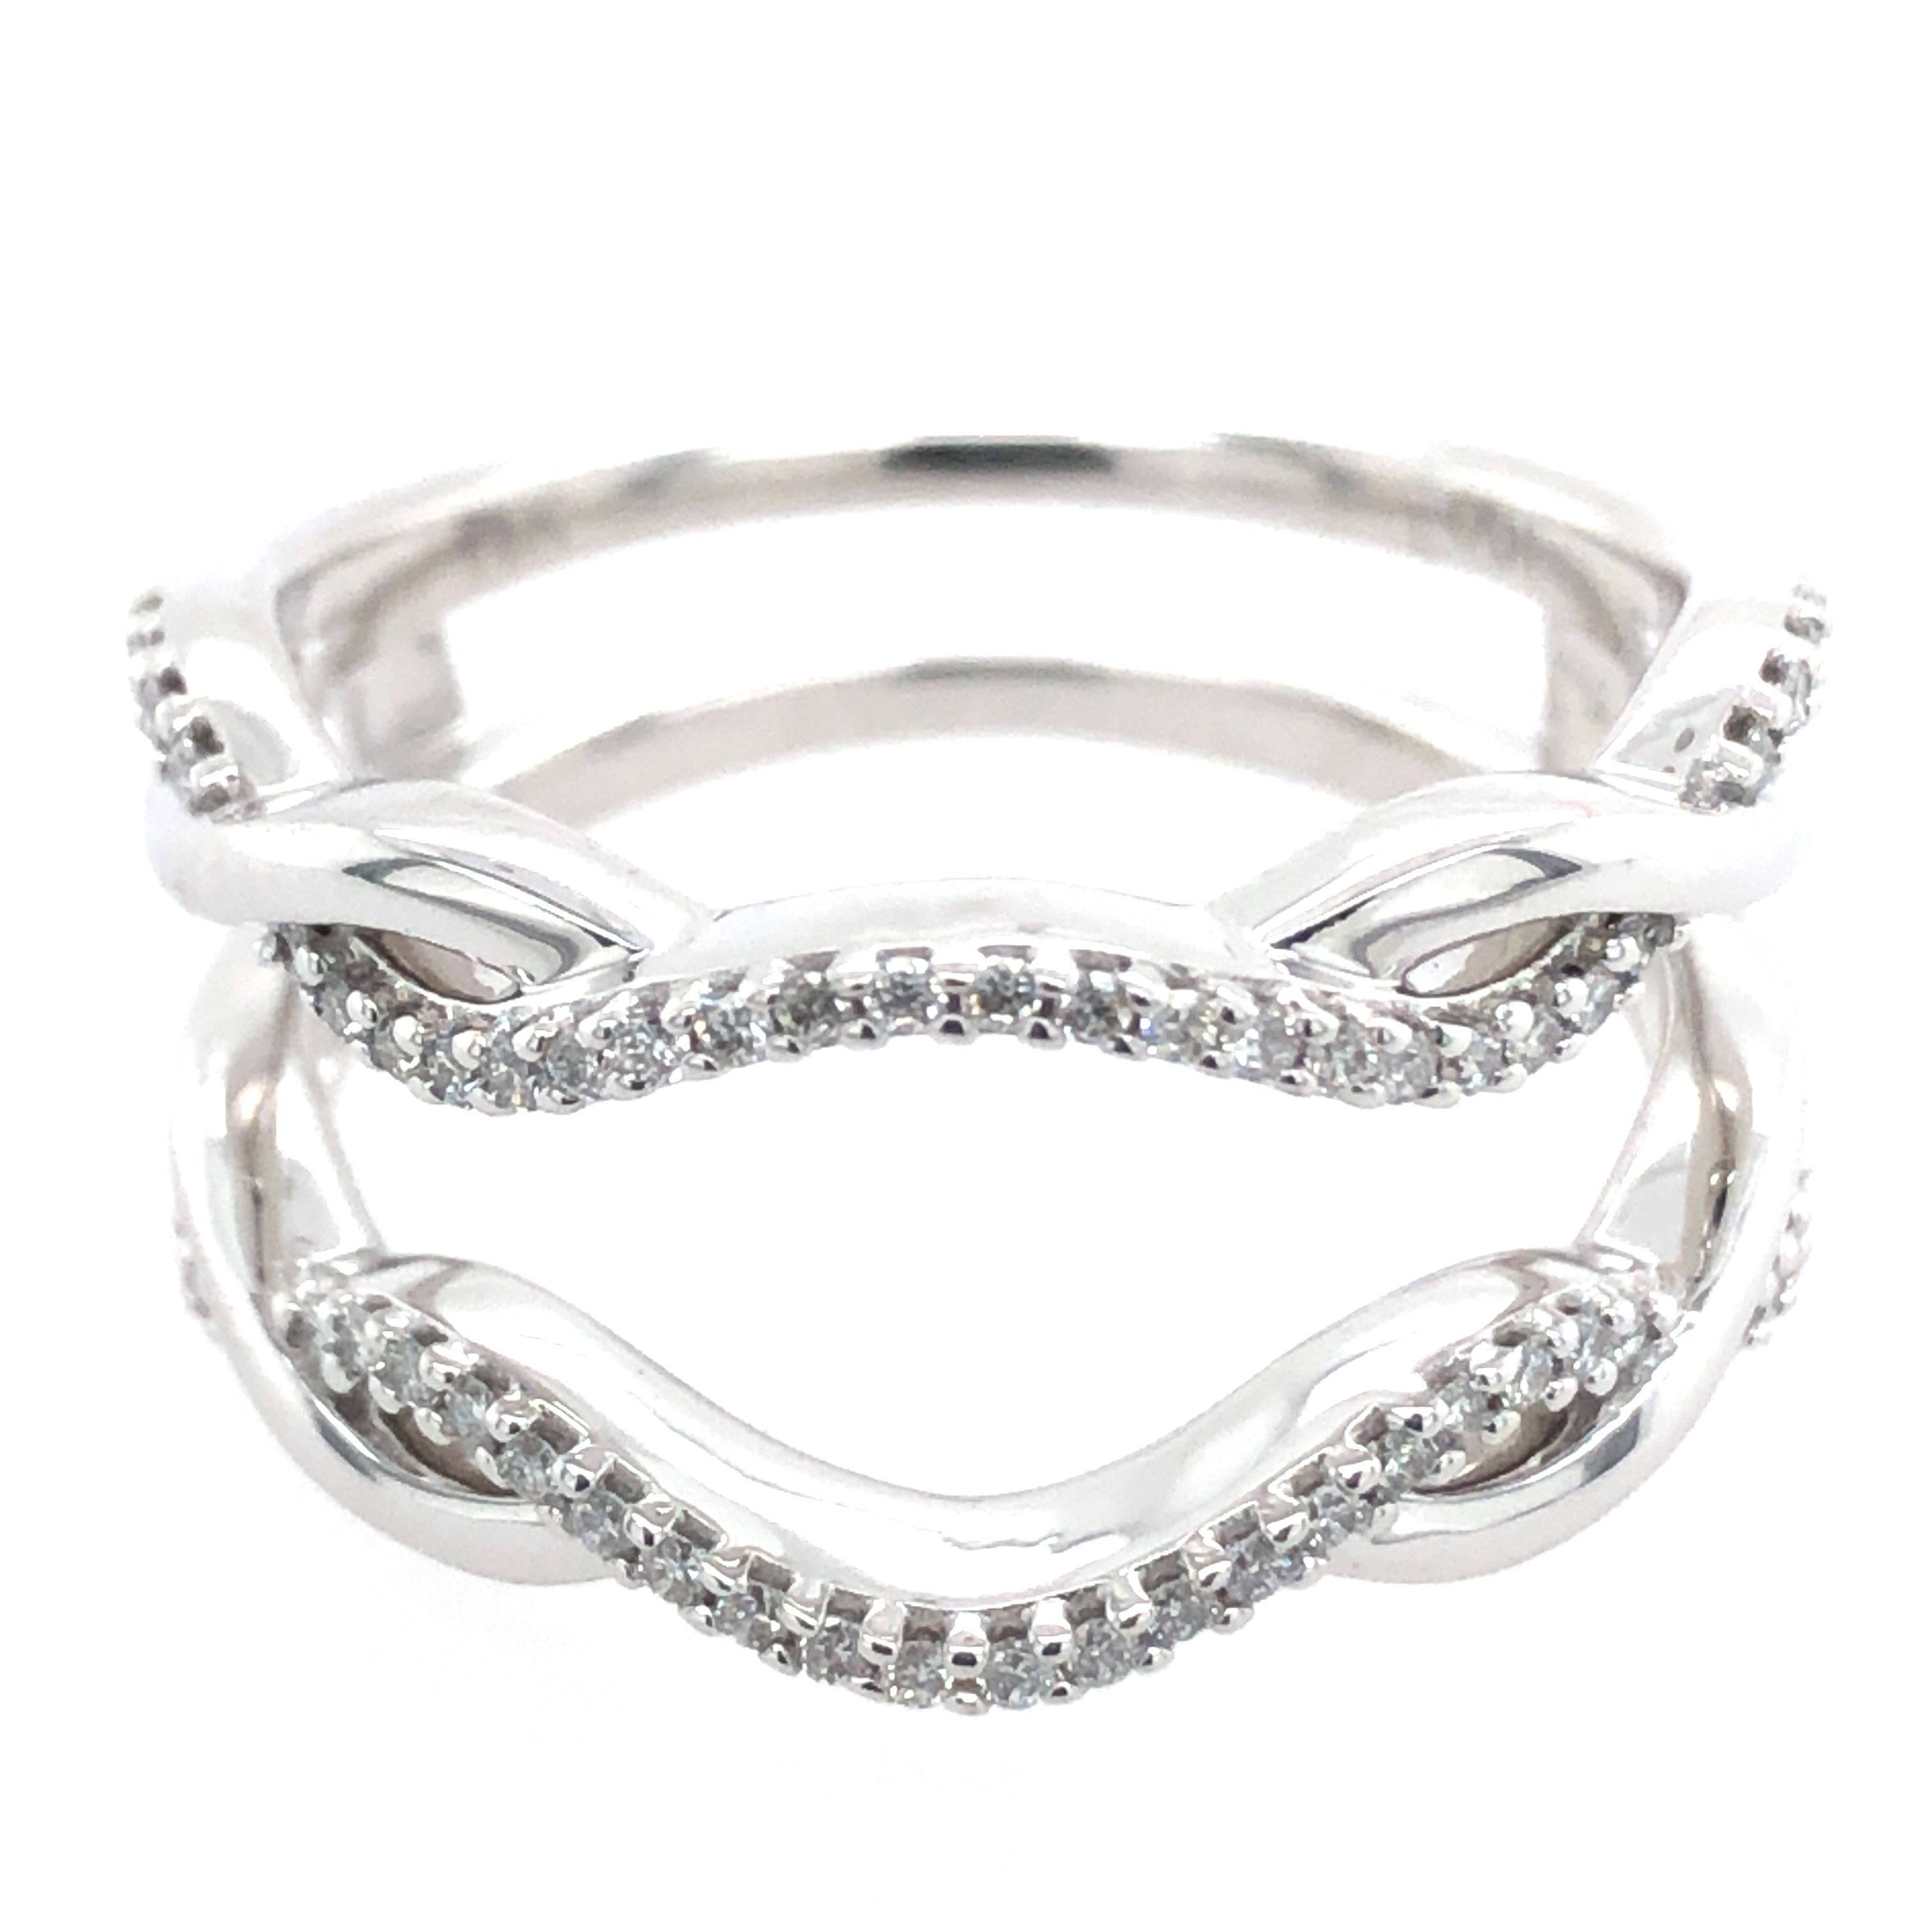 Style: Ring Gaurd - Diamond Wedding Bands for Mountings